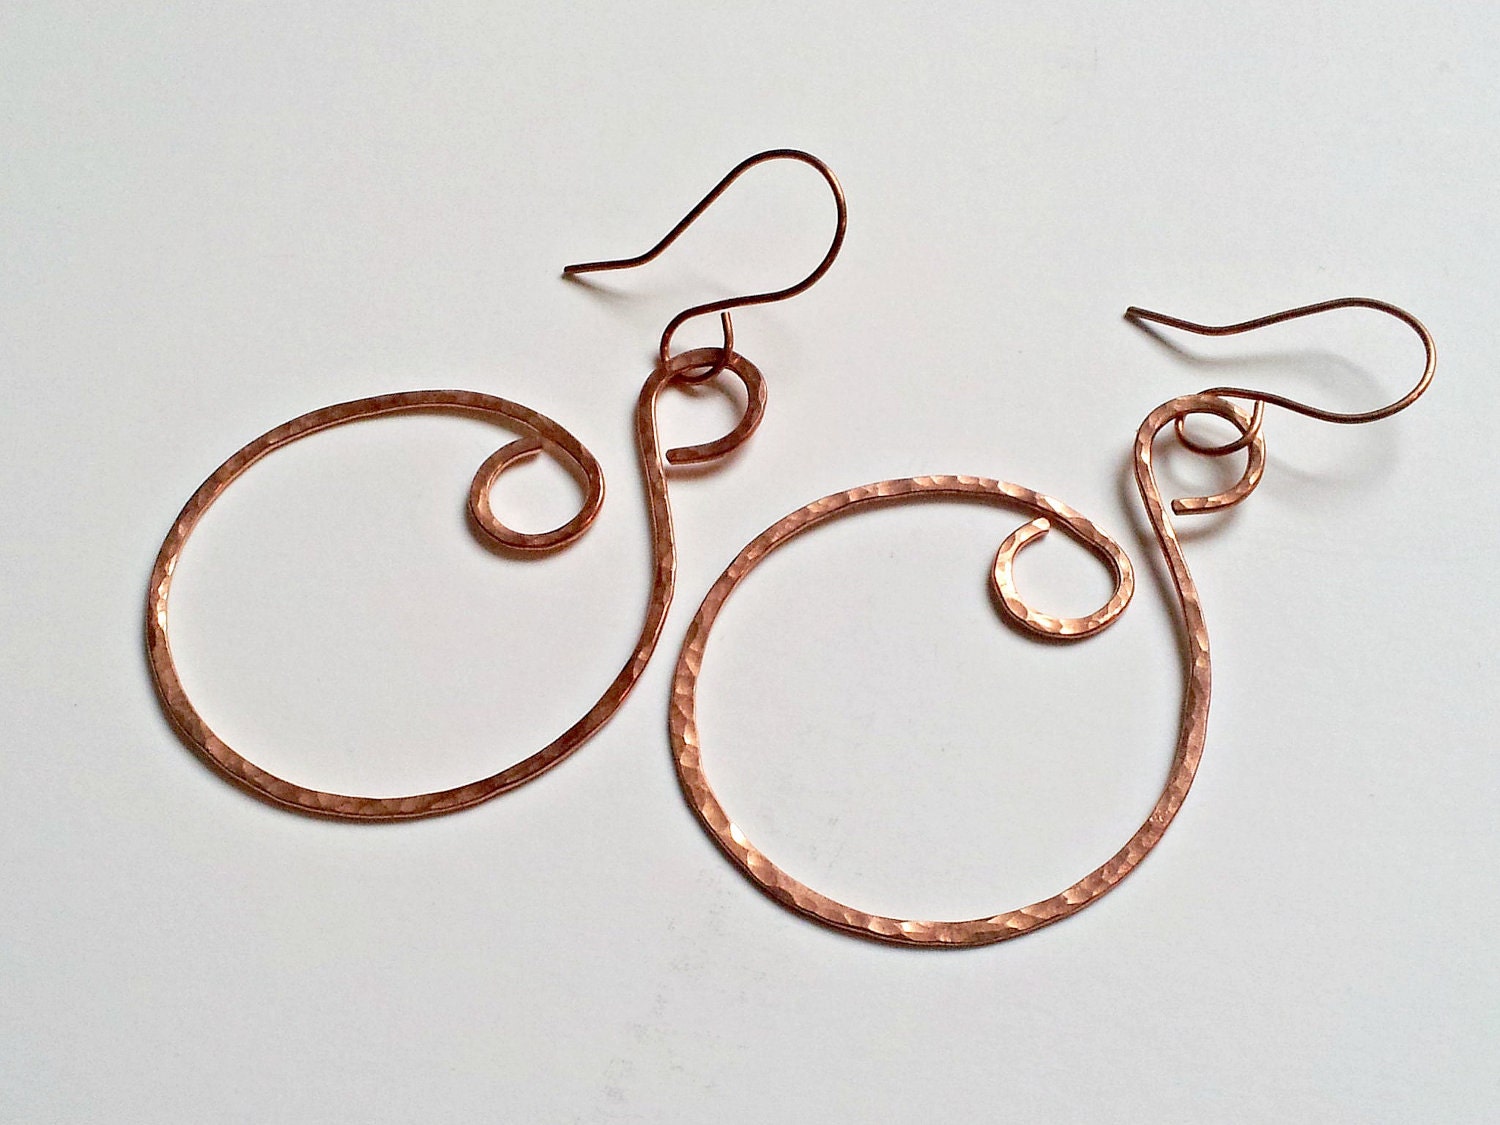 Large scroll Copper Earrings with Hammered Texture - RiLynnDesigns